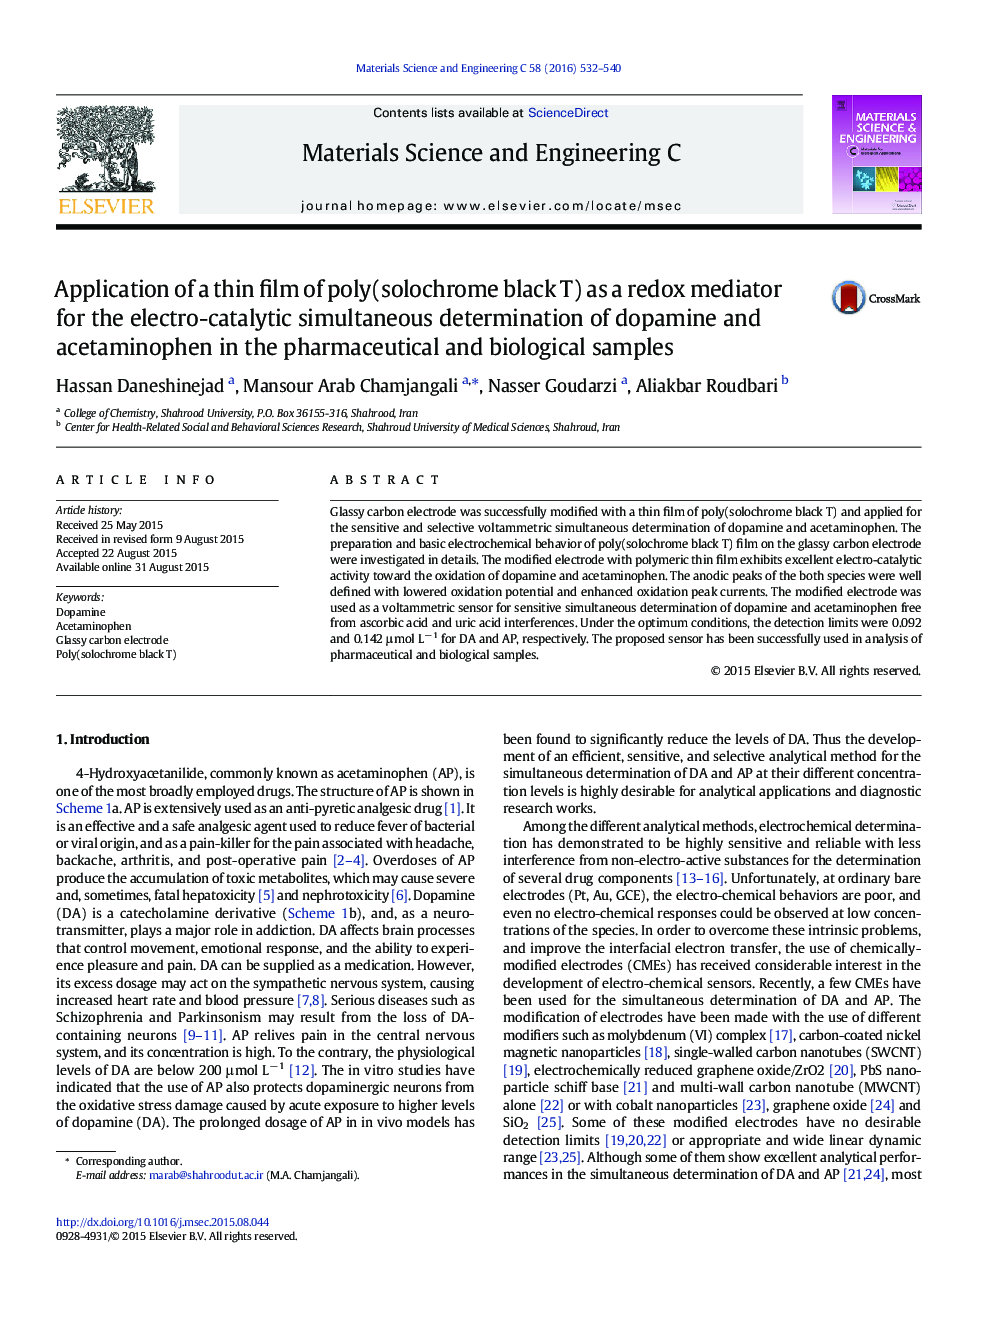 Application of a thin film of poly(solochrome black T) as a redox mediator for the electro-catalytic simultaneous determination of dopamine and acetaminophen in the pharmaceutical and biological samples